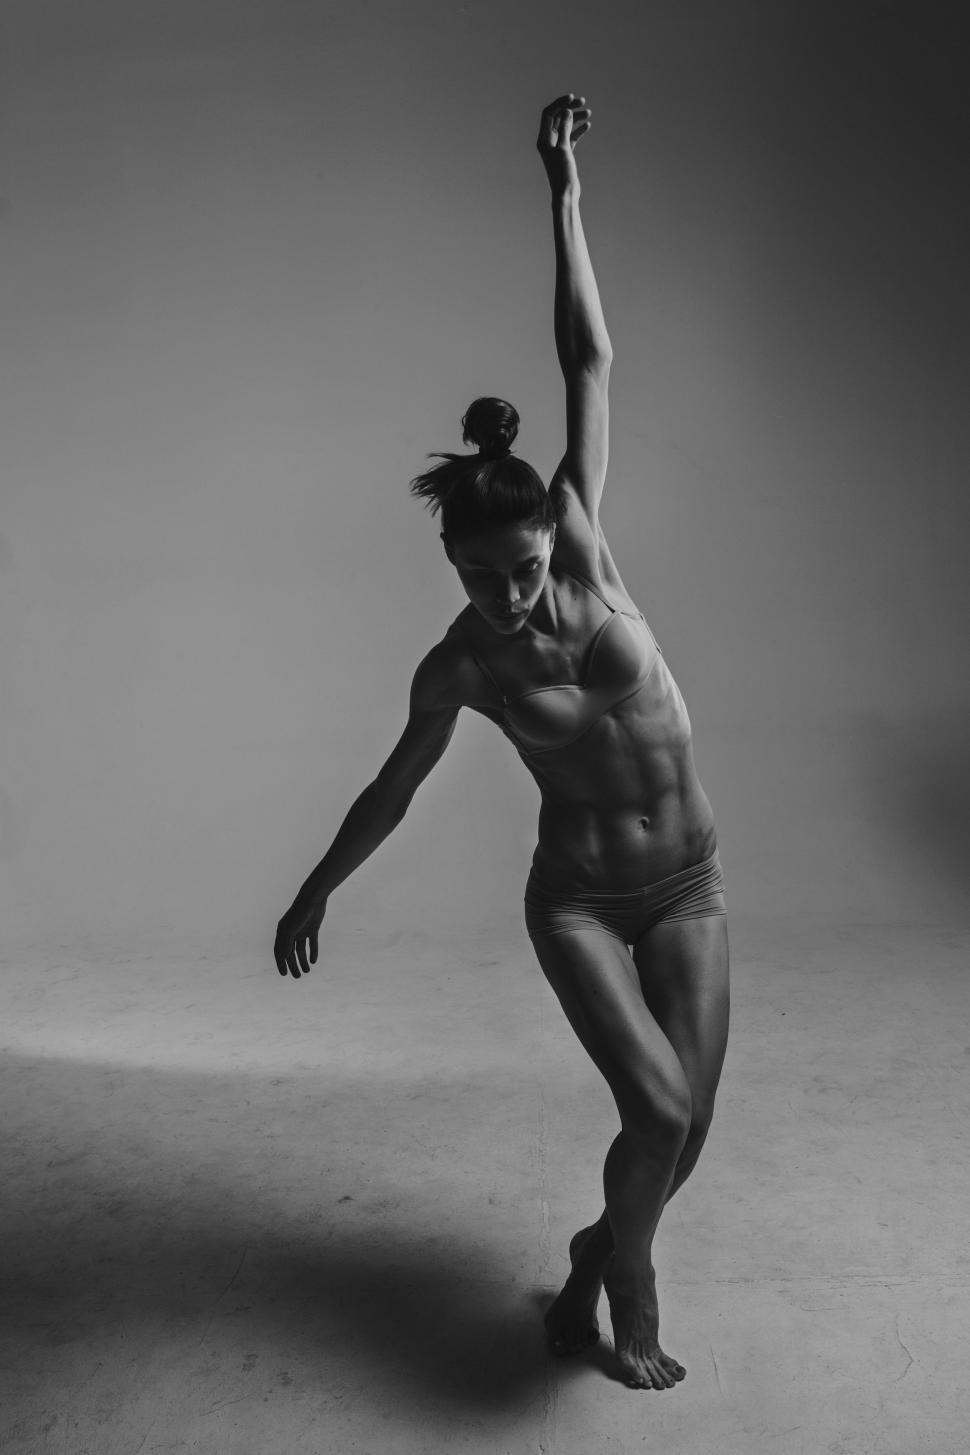 Free Image of Man Performing a Dance Move in Black and White 